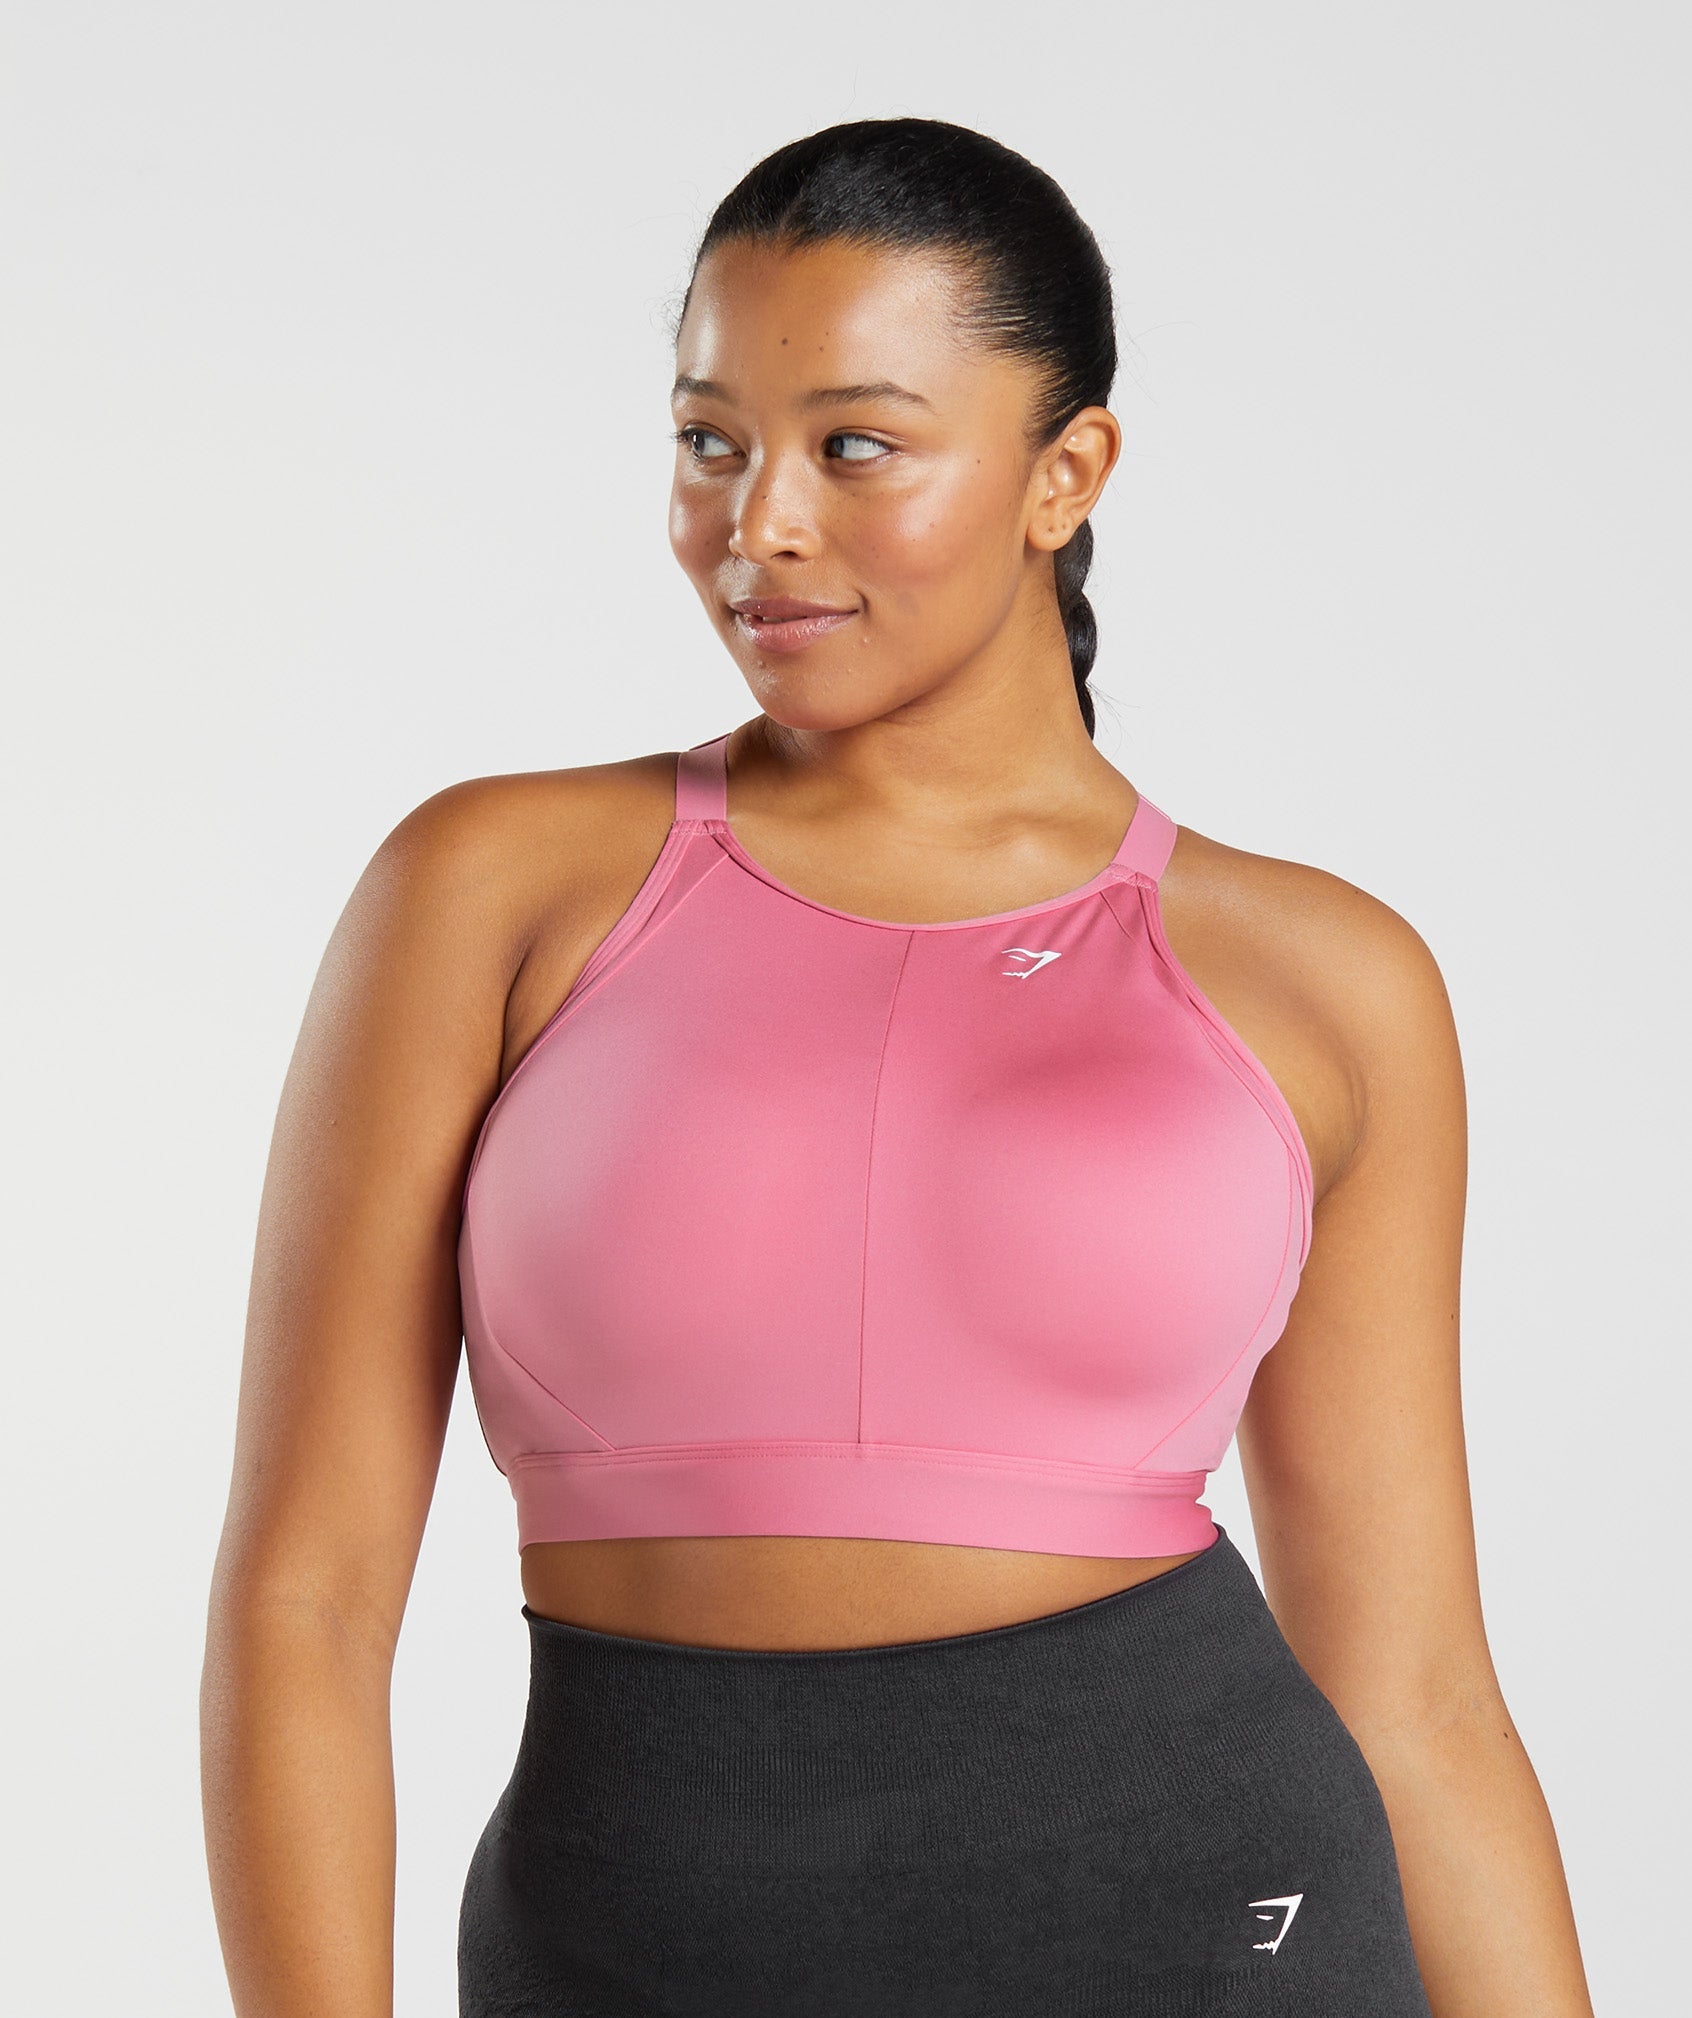 Extreme Support Sports Bra - Black - Chérie Amour